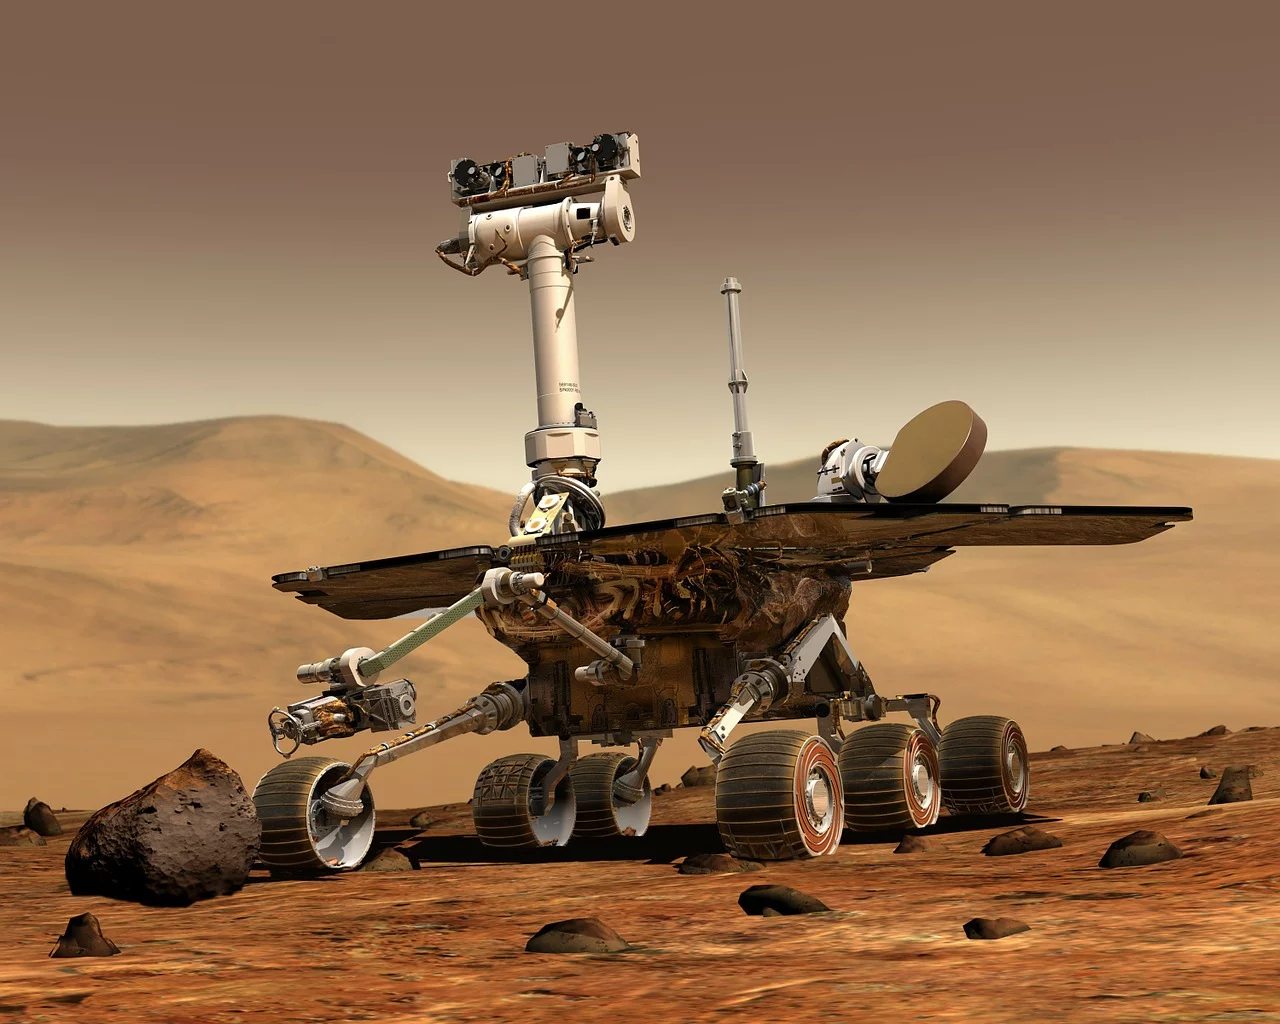 opportunity-rover-facts-stats